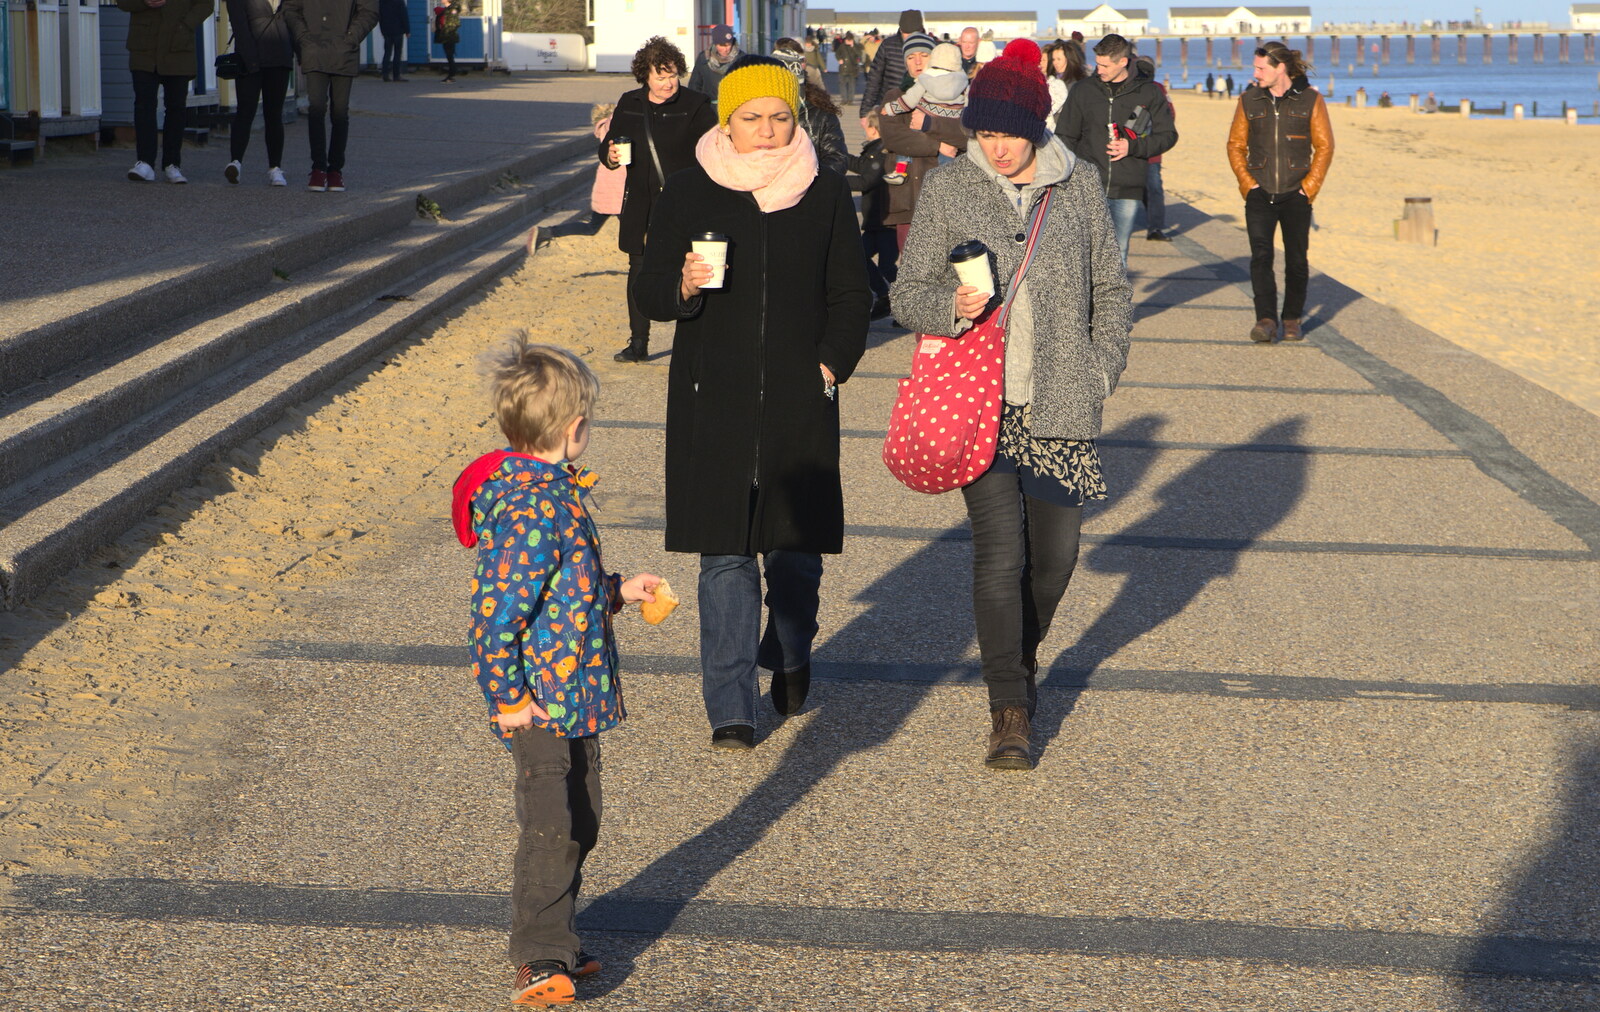 Haryanna, Isobel and Harry on the prom from Boxing Day in Southwold, Suffolk - 26th December 2016